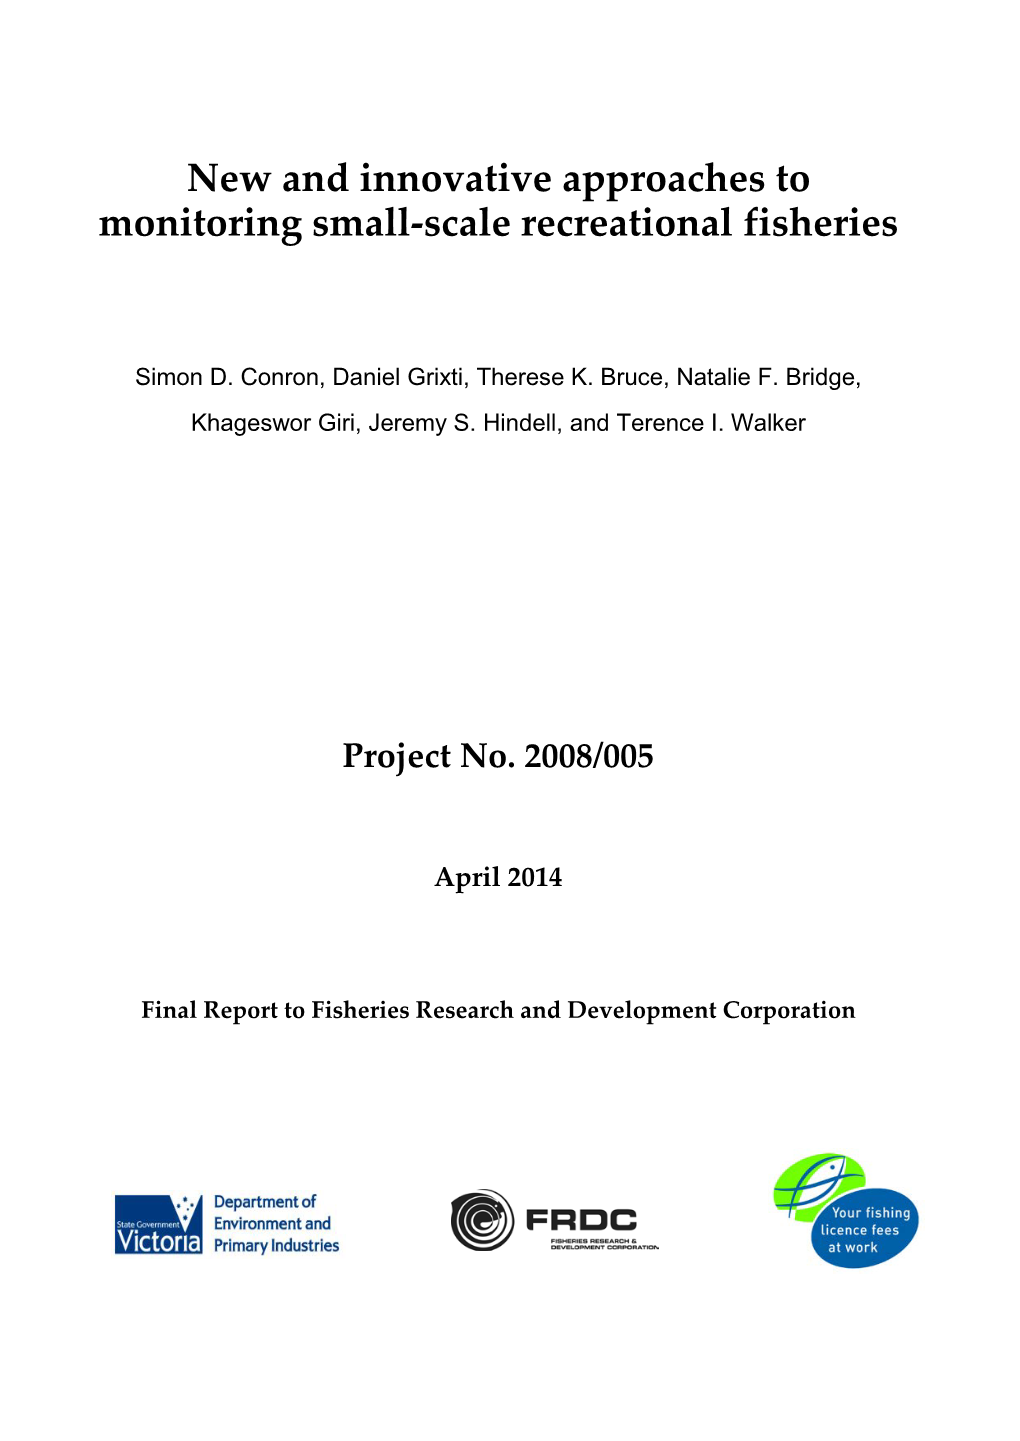 New and Innovative Approaches to Monitoring Small-Scale Recreational Fisheries